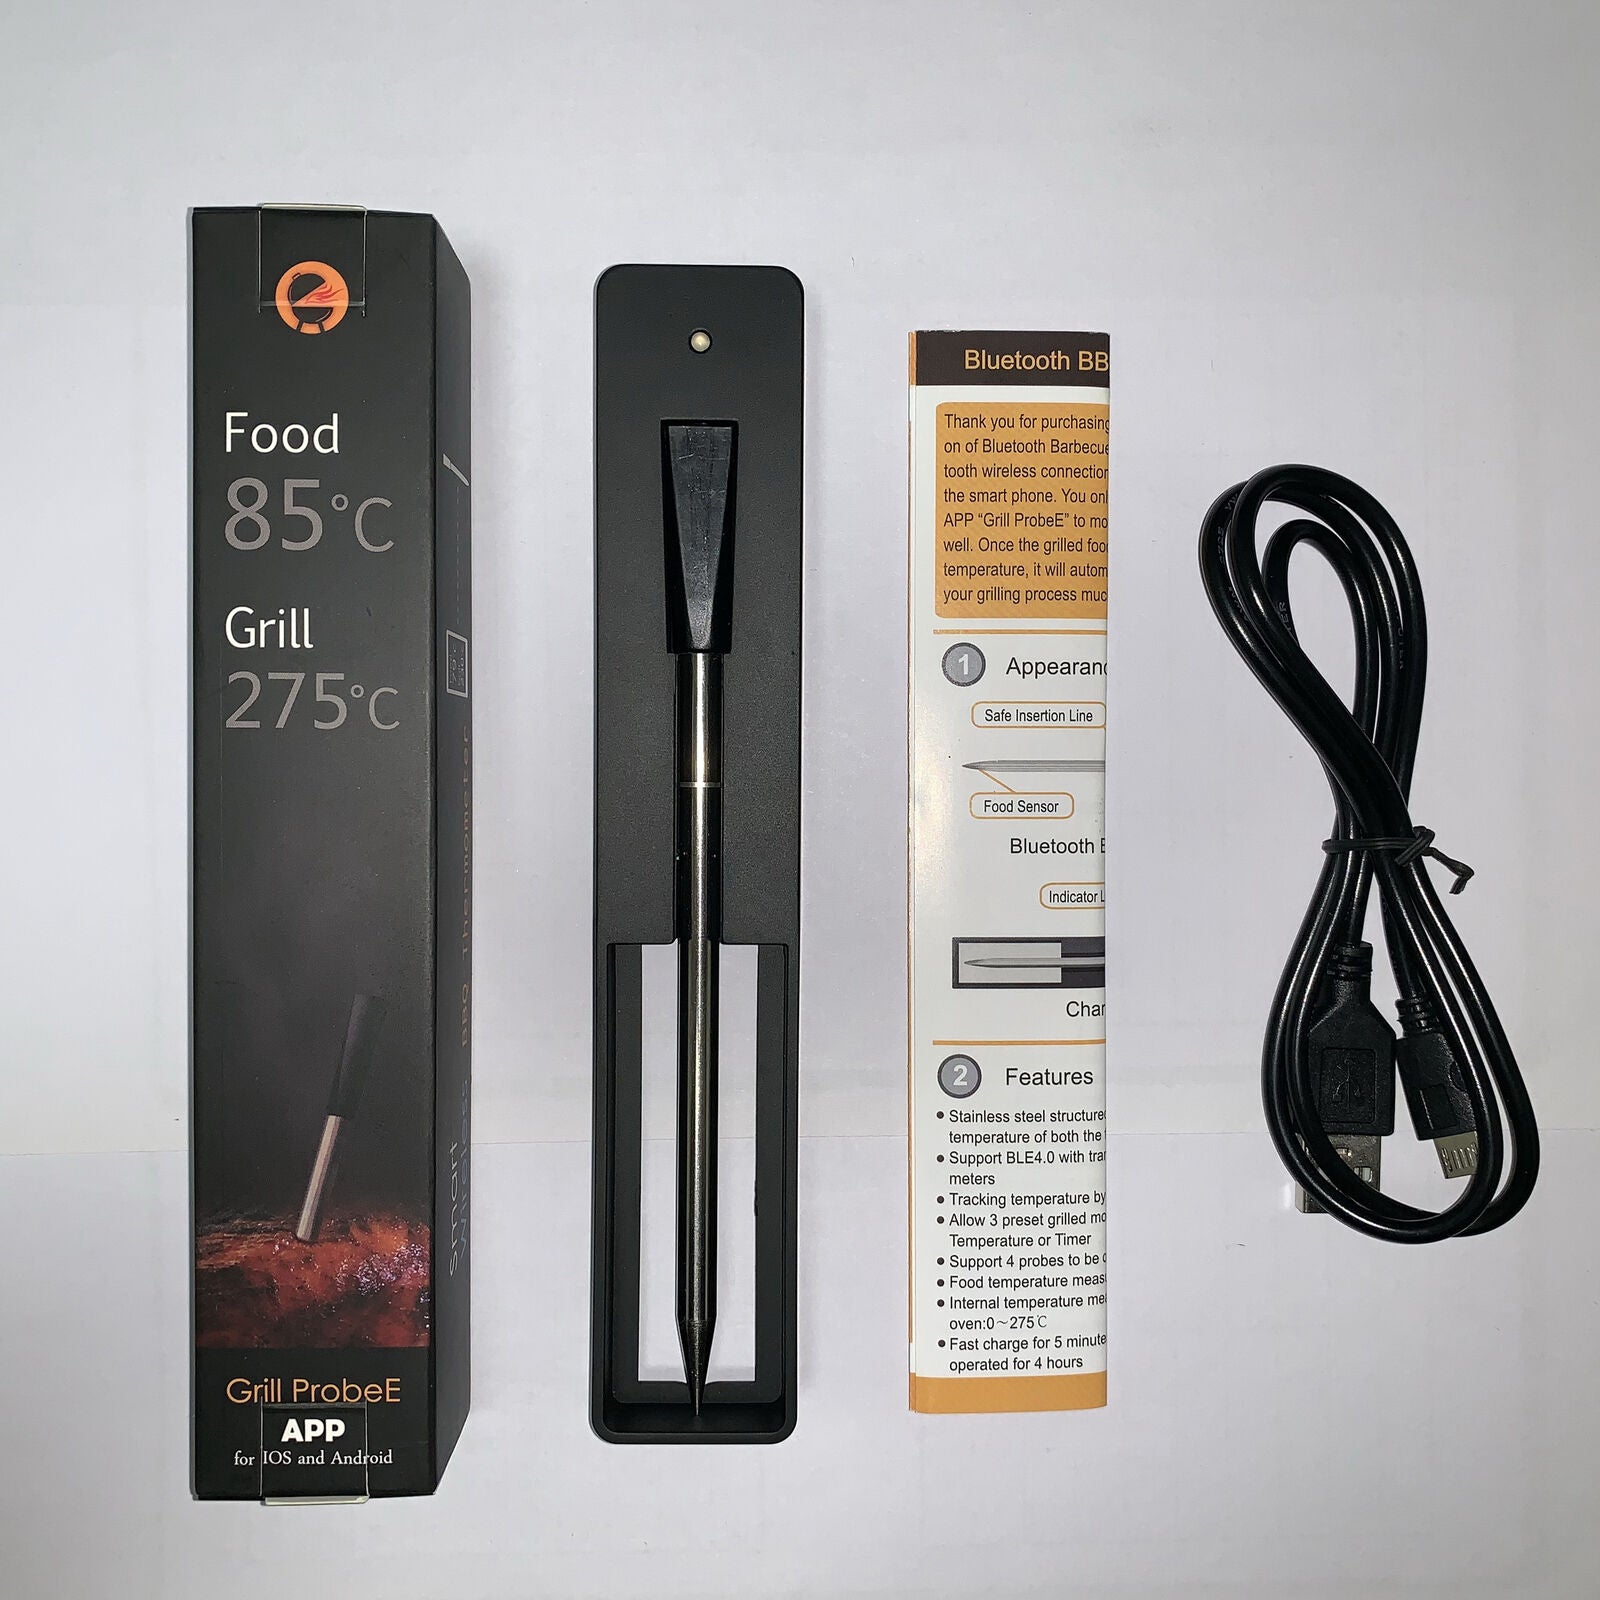 Bluetooth Digital Thermometer for Barbeque and Oven with